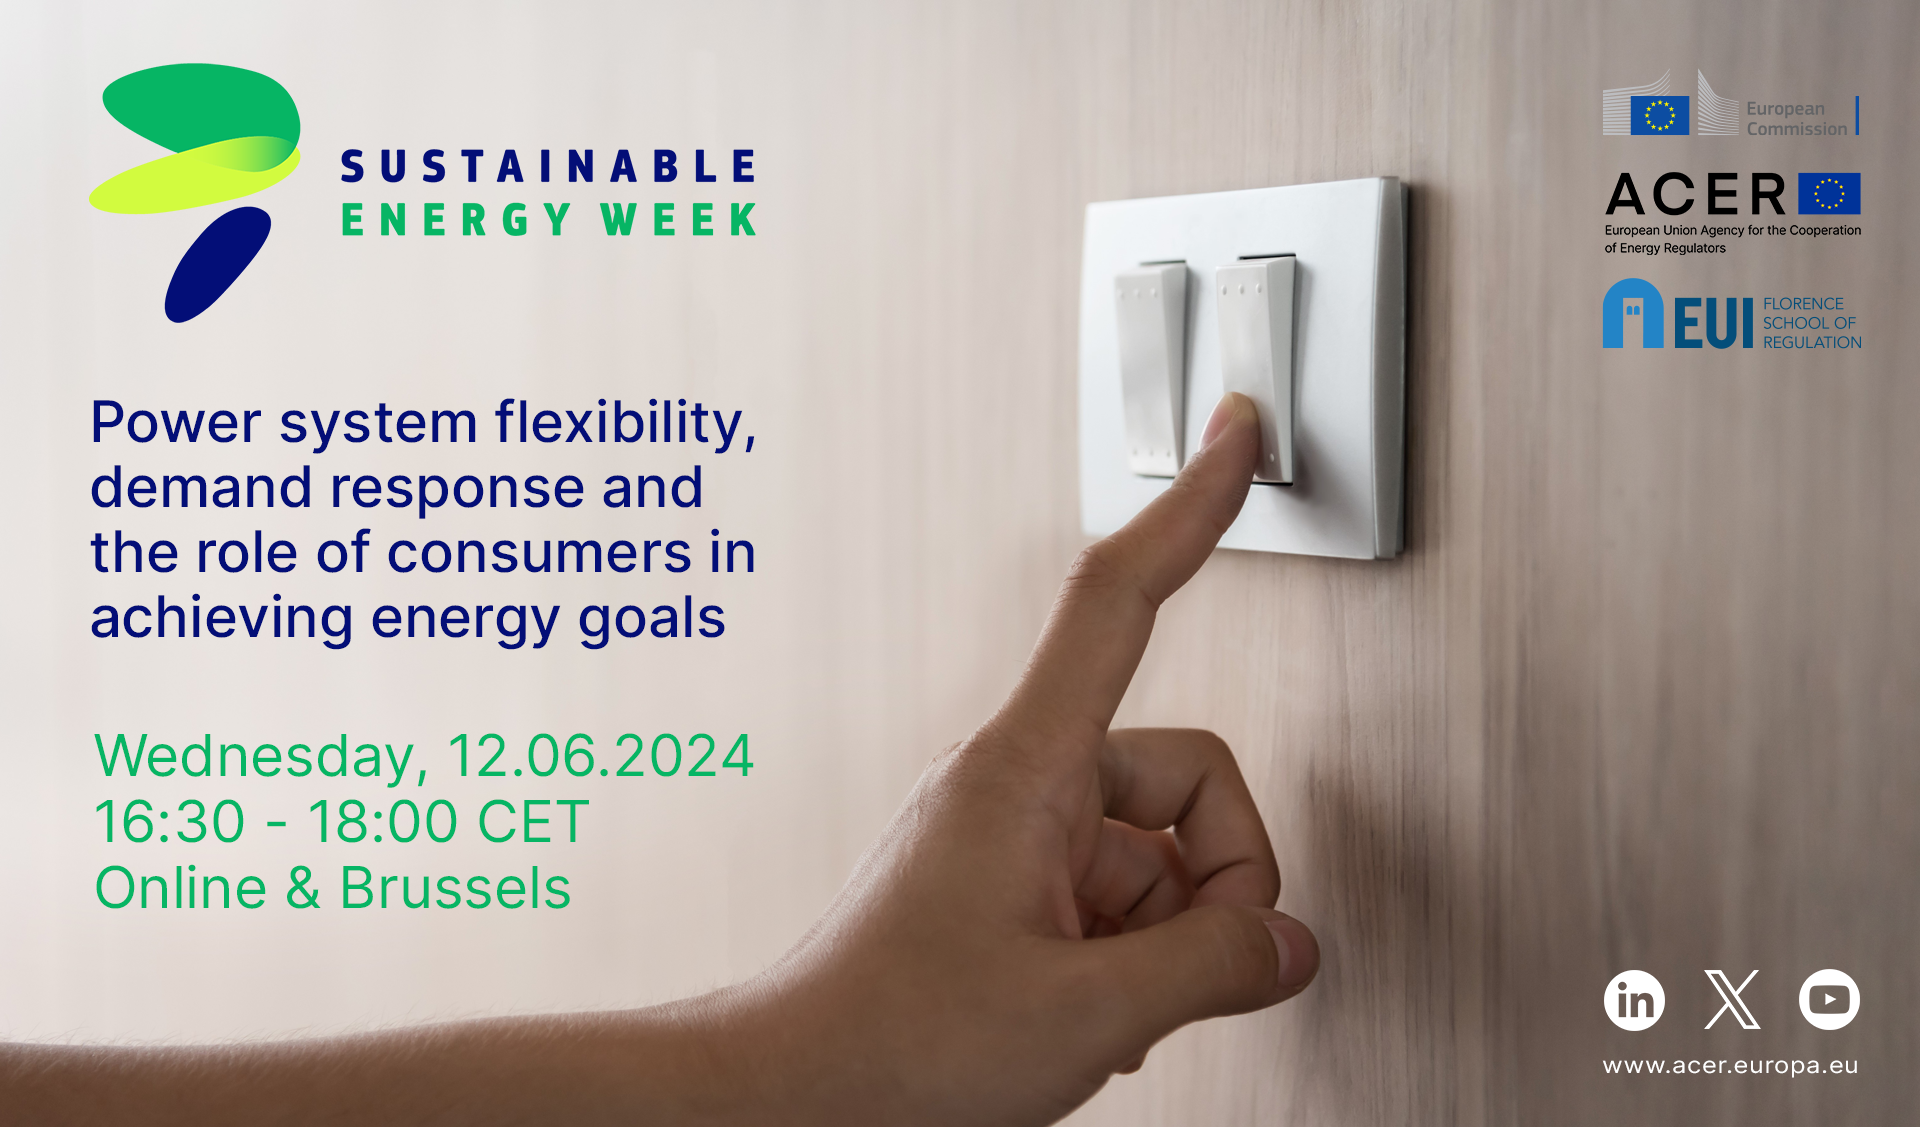 Power system flexibility, demand response and the role of consumers in achieving energy goals